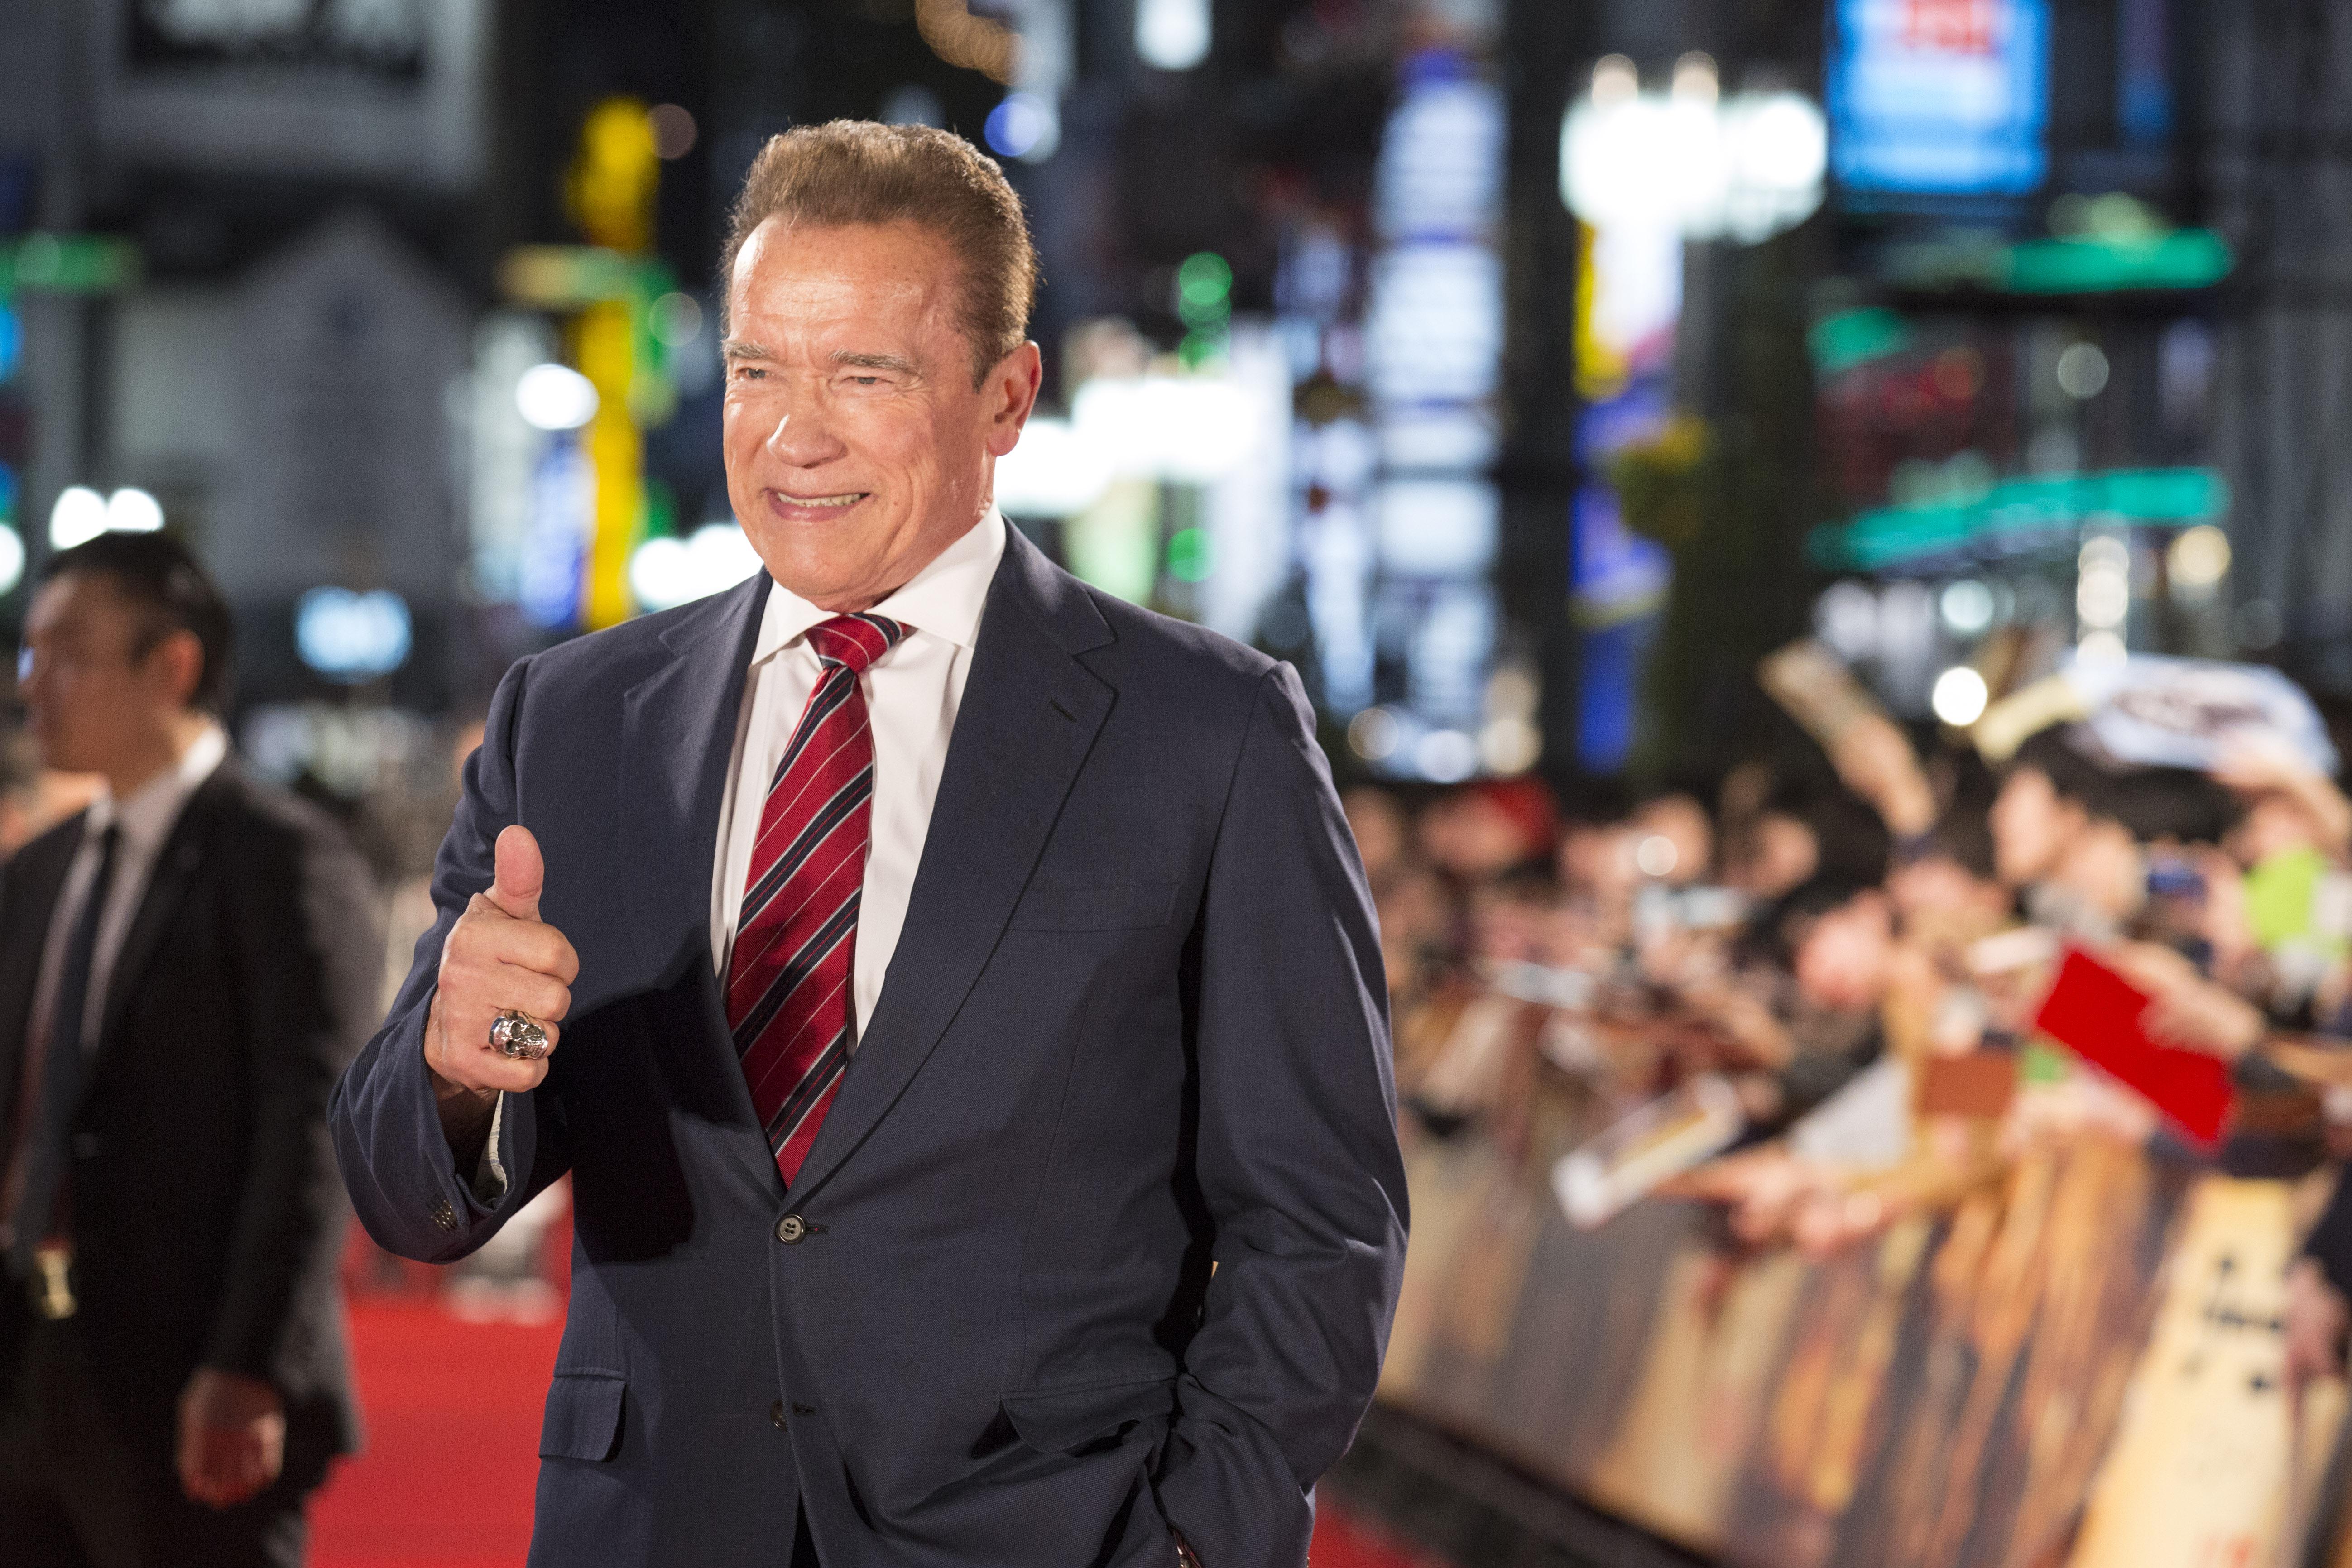 Arnold Schwarzenegger smiles and makes a thumbs-up on the red carpet, with cheering fans in the background